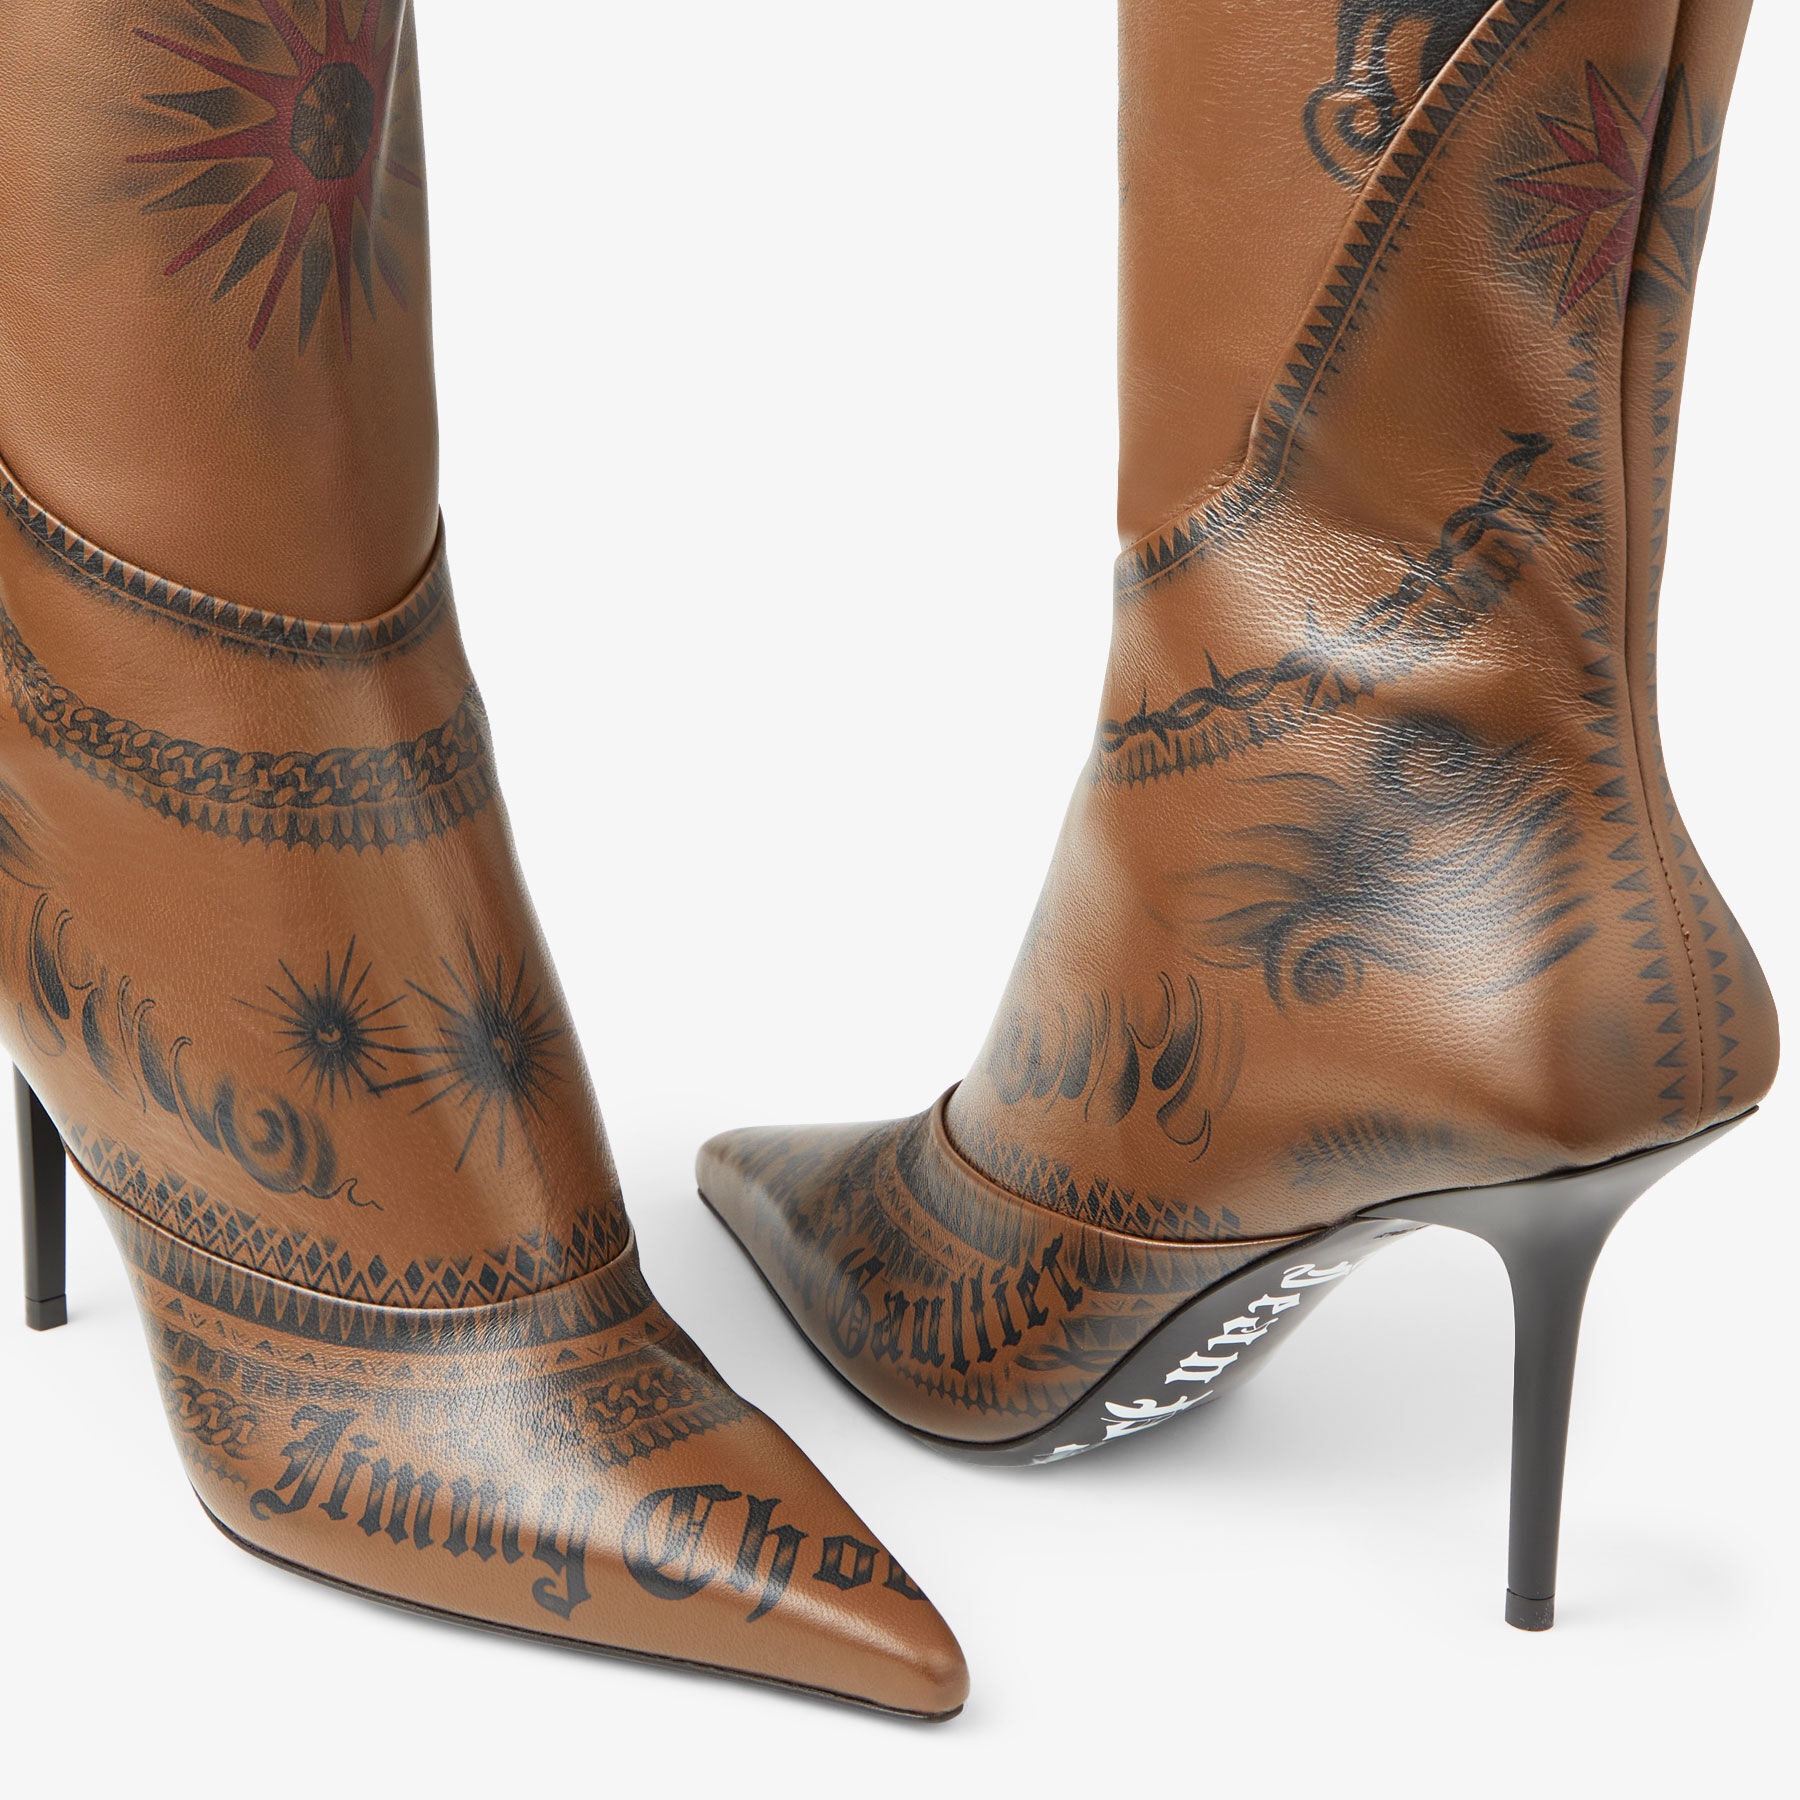 Jimmy Choo / Jean Paul Gaultier Over The Knee Boot 90
Clove Tattoo Printed Leather Over-The-Knee Boo - 4